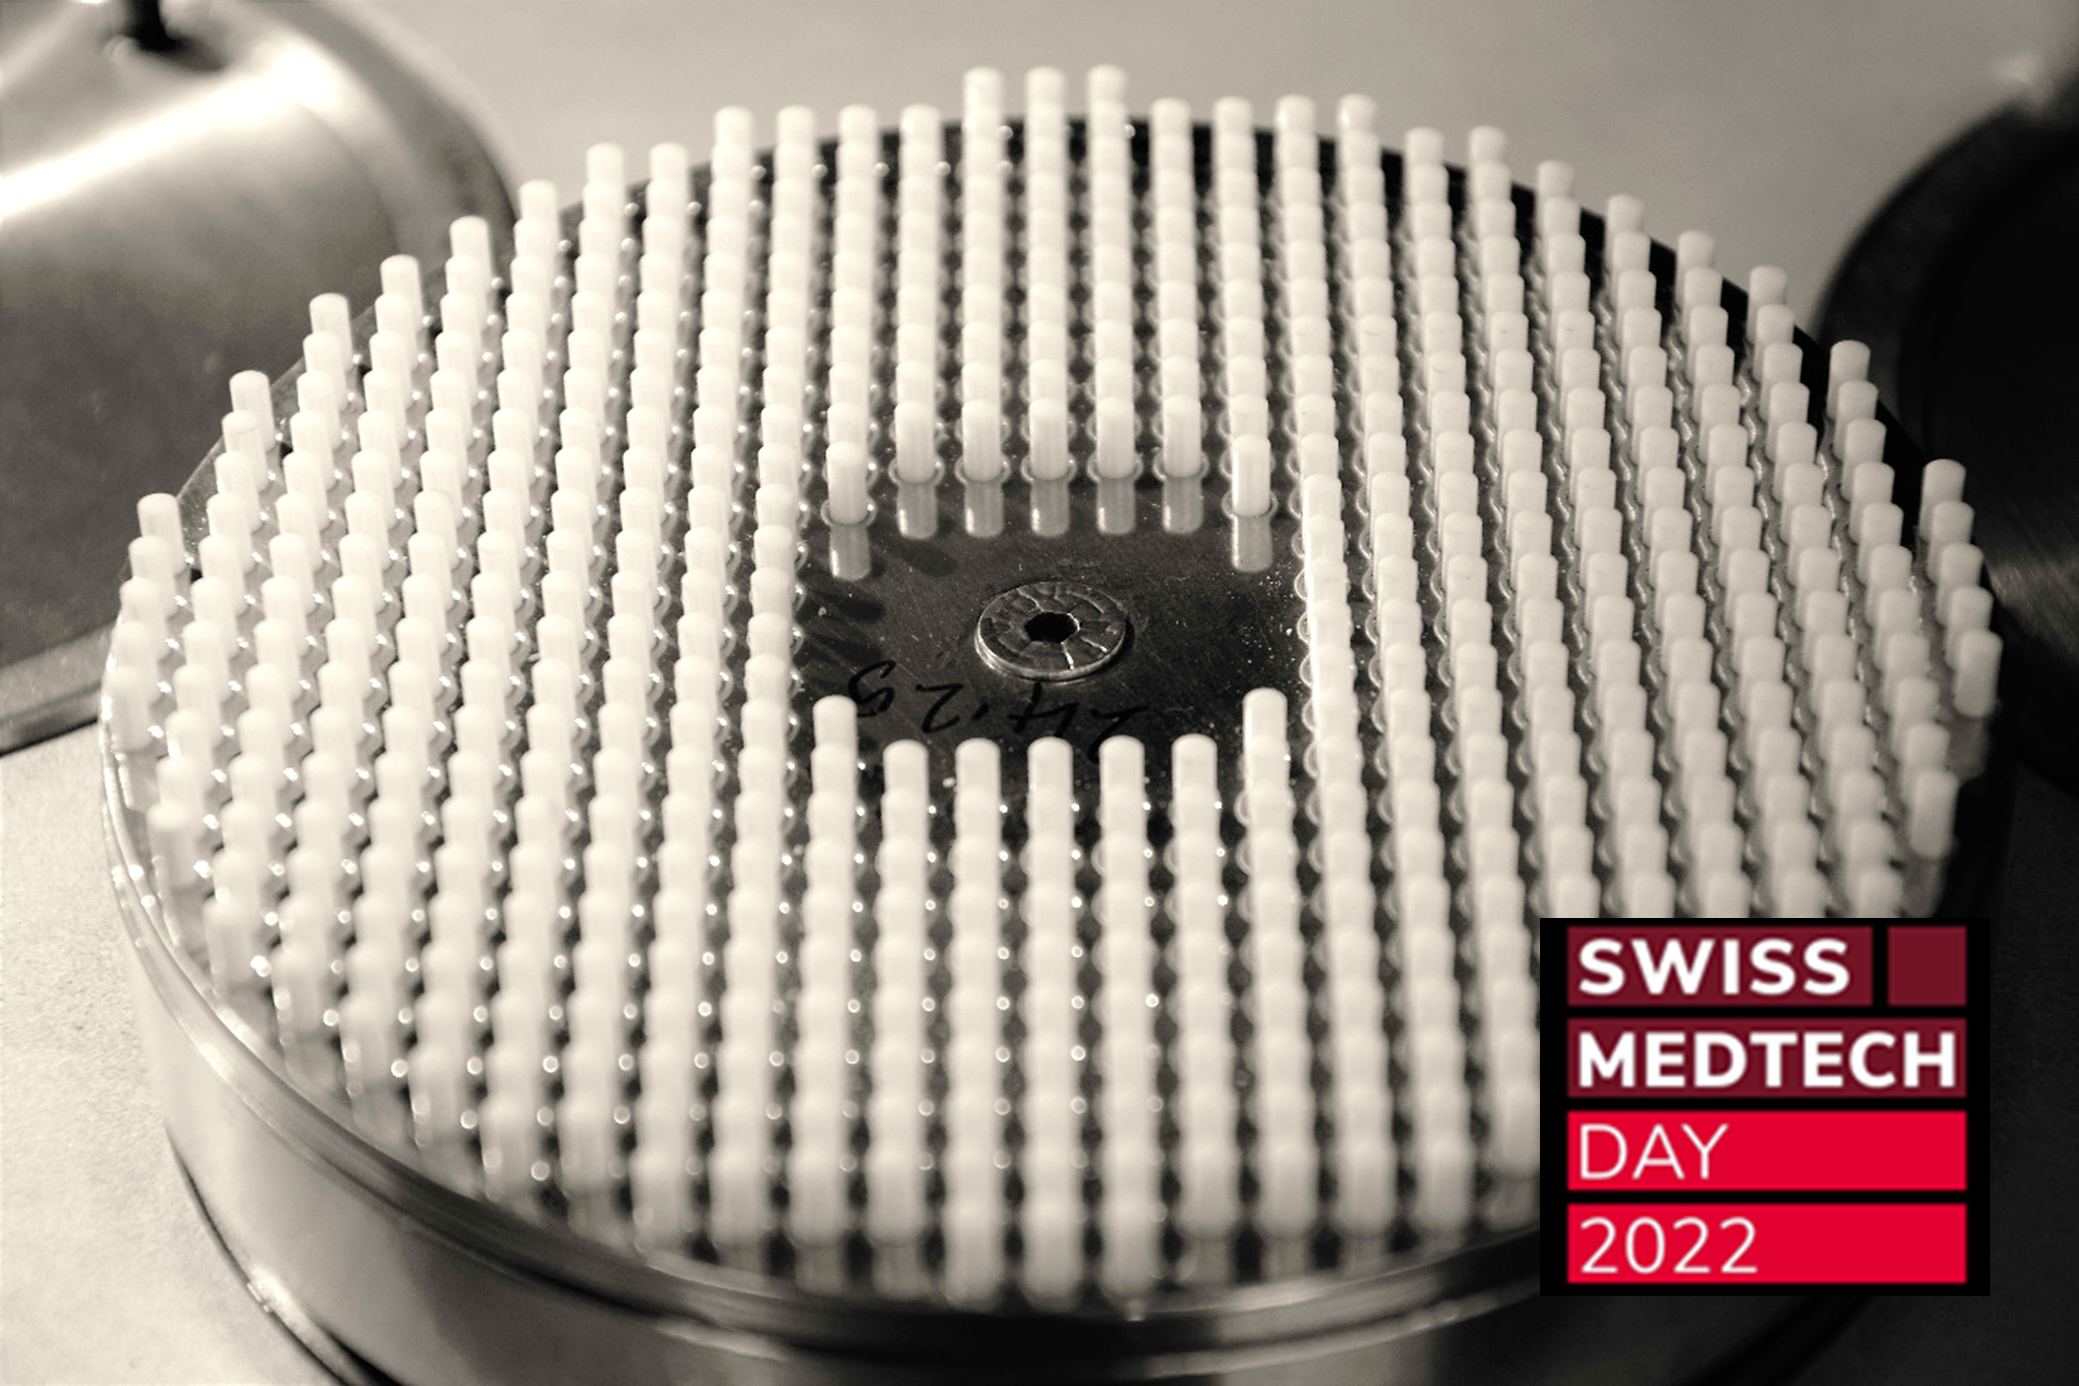 Visit us at the Swiss Medtech Day in Bern, June 14th!